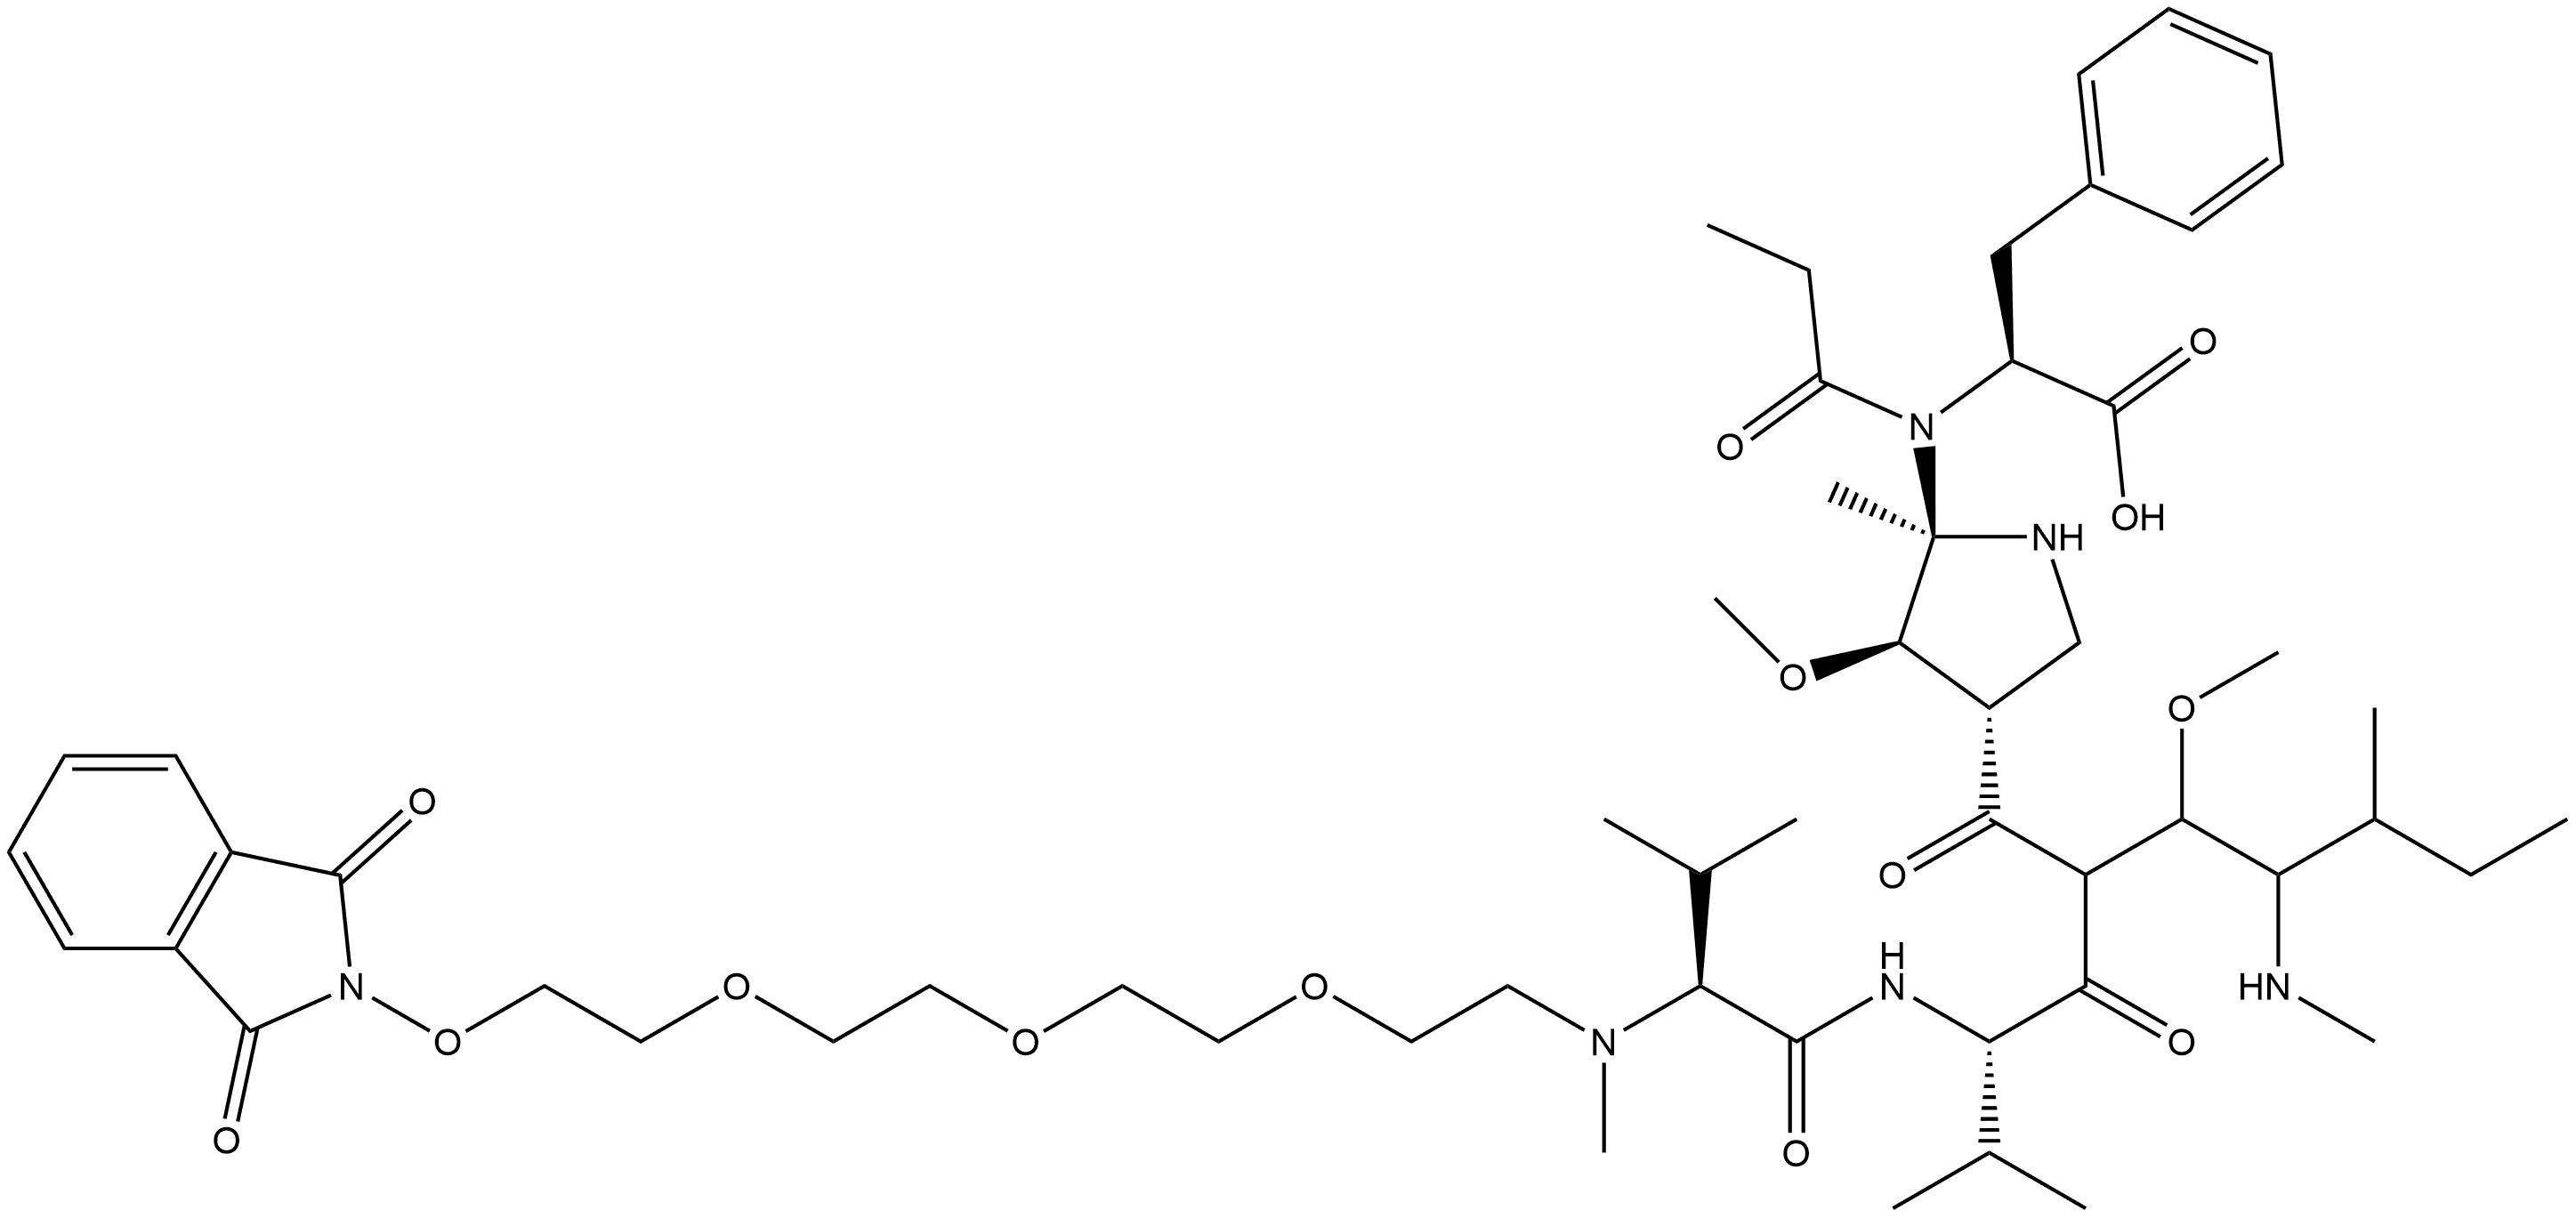 L-Phenylalanine, N-[2-[2-[2-[2-[(1,3-dihydro-1,3-dioxo-2H-isoindol-2-yl)oxy]ethoxy]ethoxy]ethoxy]ethyl]-N-methyl-L-valyl-L-valyl-(3R,4S,5S)-3-methoxy-5-methyl-4-(methylamino)heptanoyl-(αR,βR,2S)-β-methoxy-α-methyl-2-pyrrolidinepropanoyl- Structure